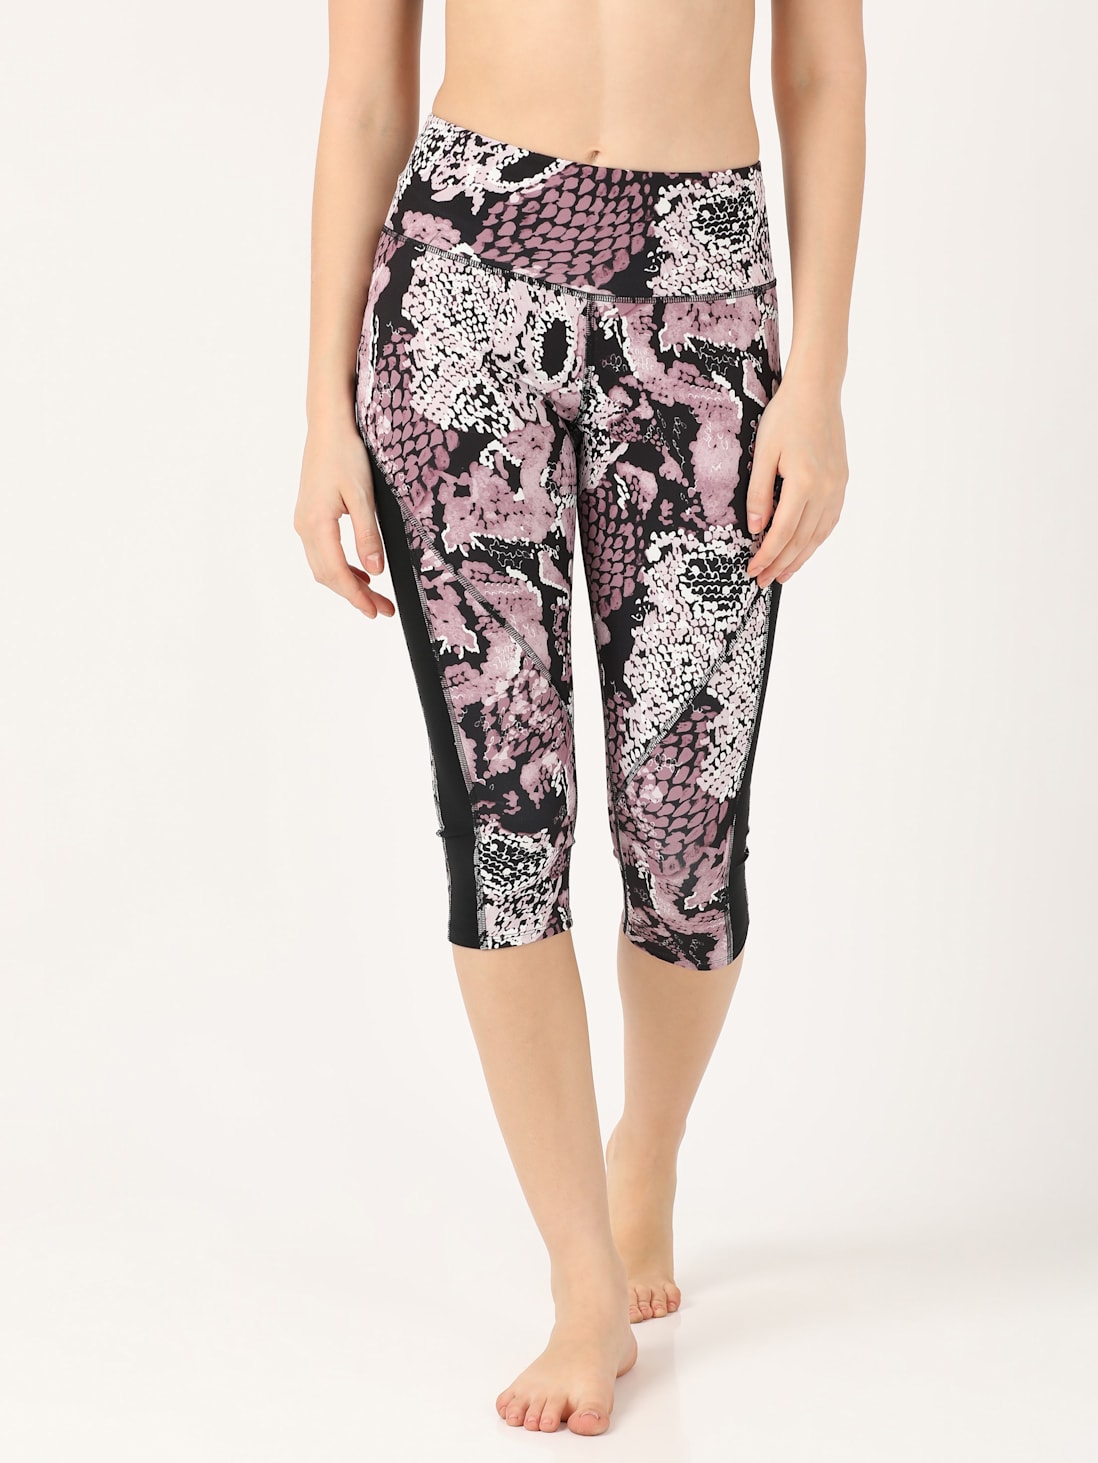 Women's Microfiber Elastane Stretch Slim Fit Printed Capri with Back  Waistband Pocket and Stay Dry Technology - Old Rose Printed